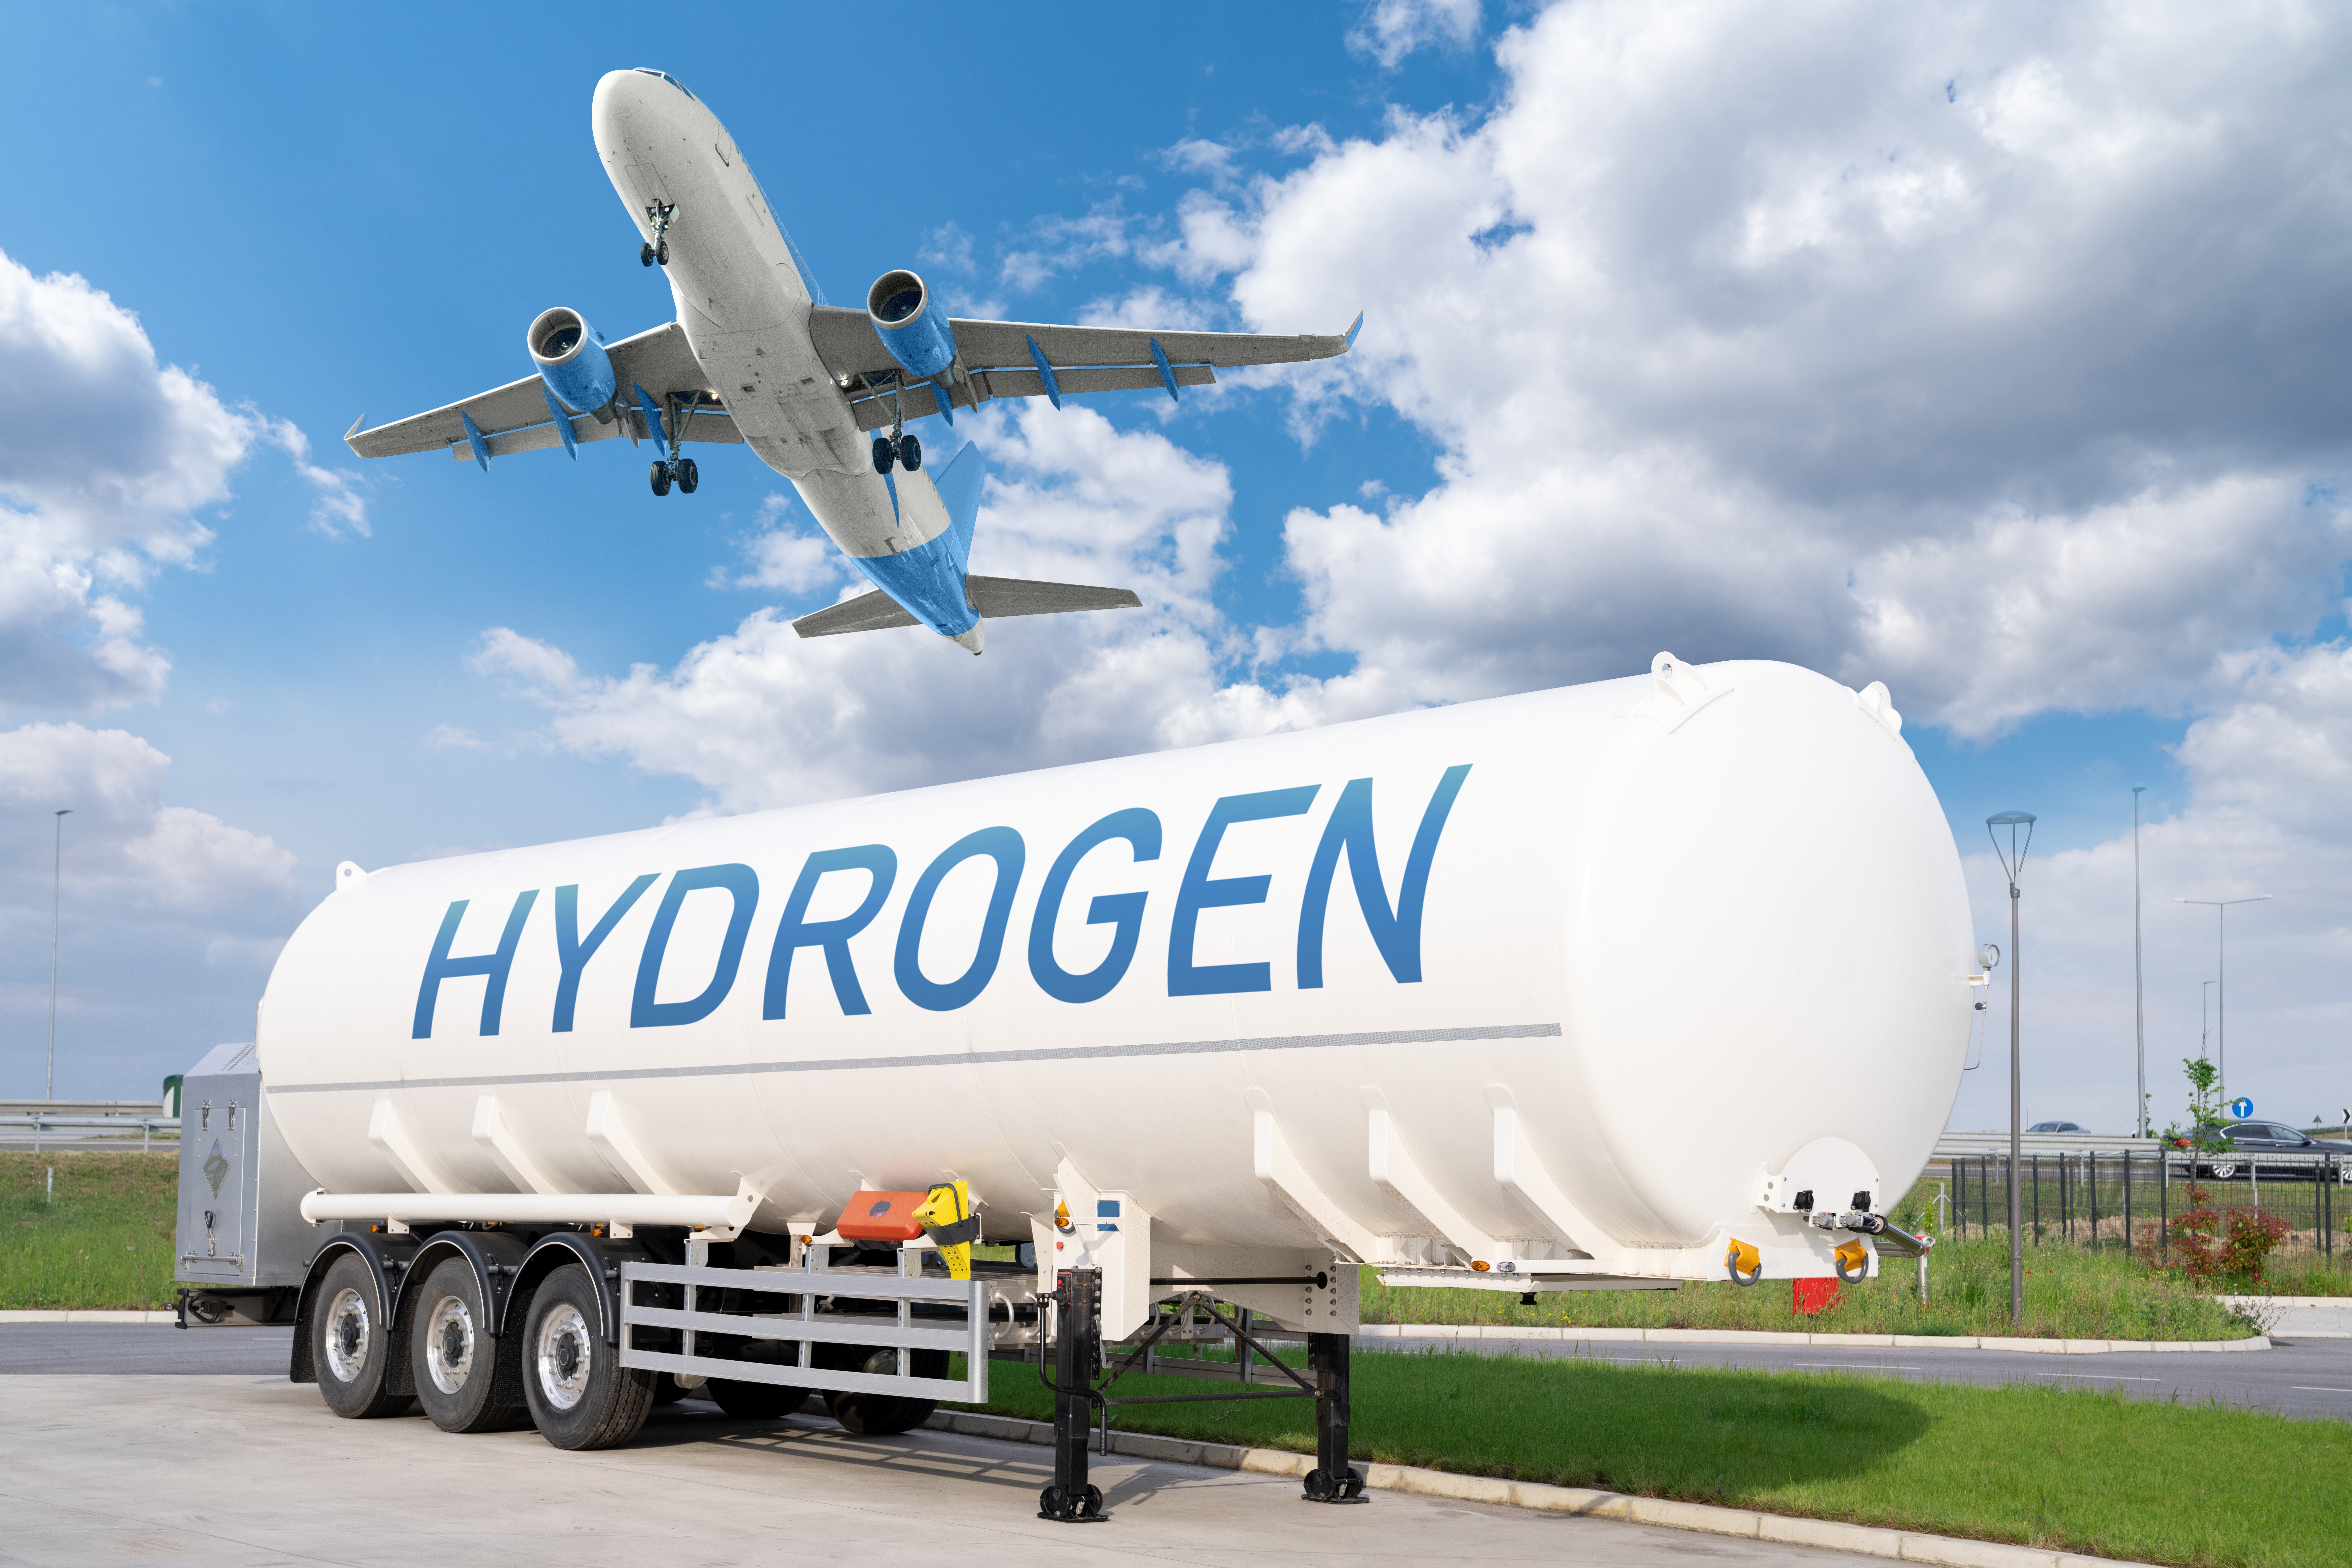 Aeroplane taking off on sunny day. Hydrogen fuel tank in foreground